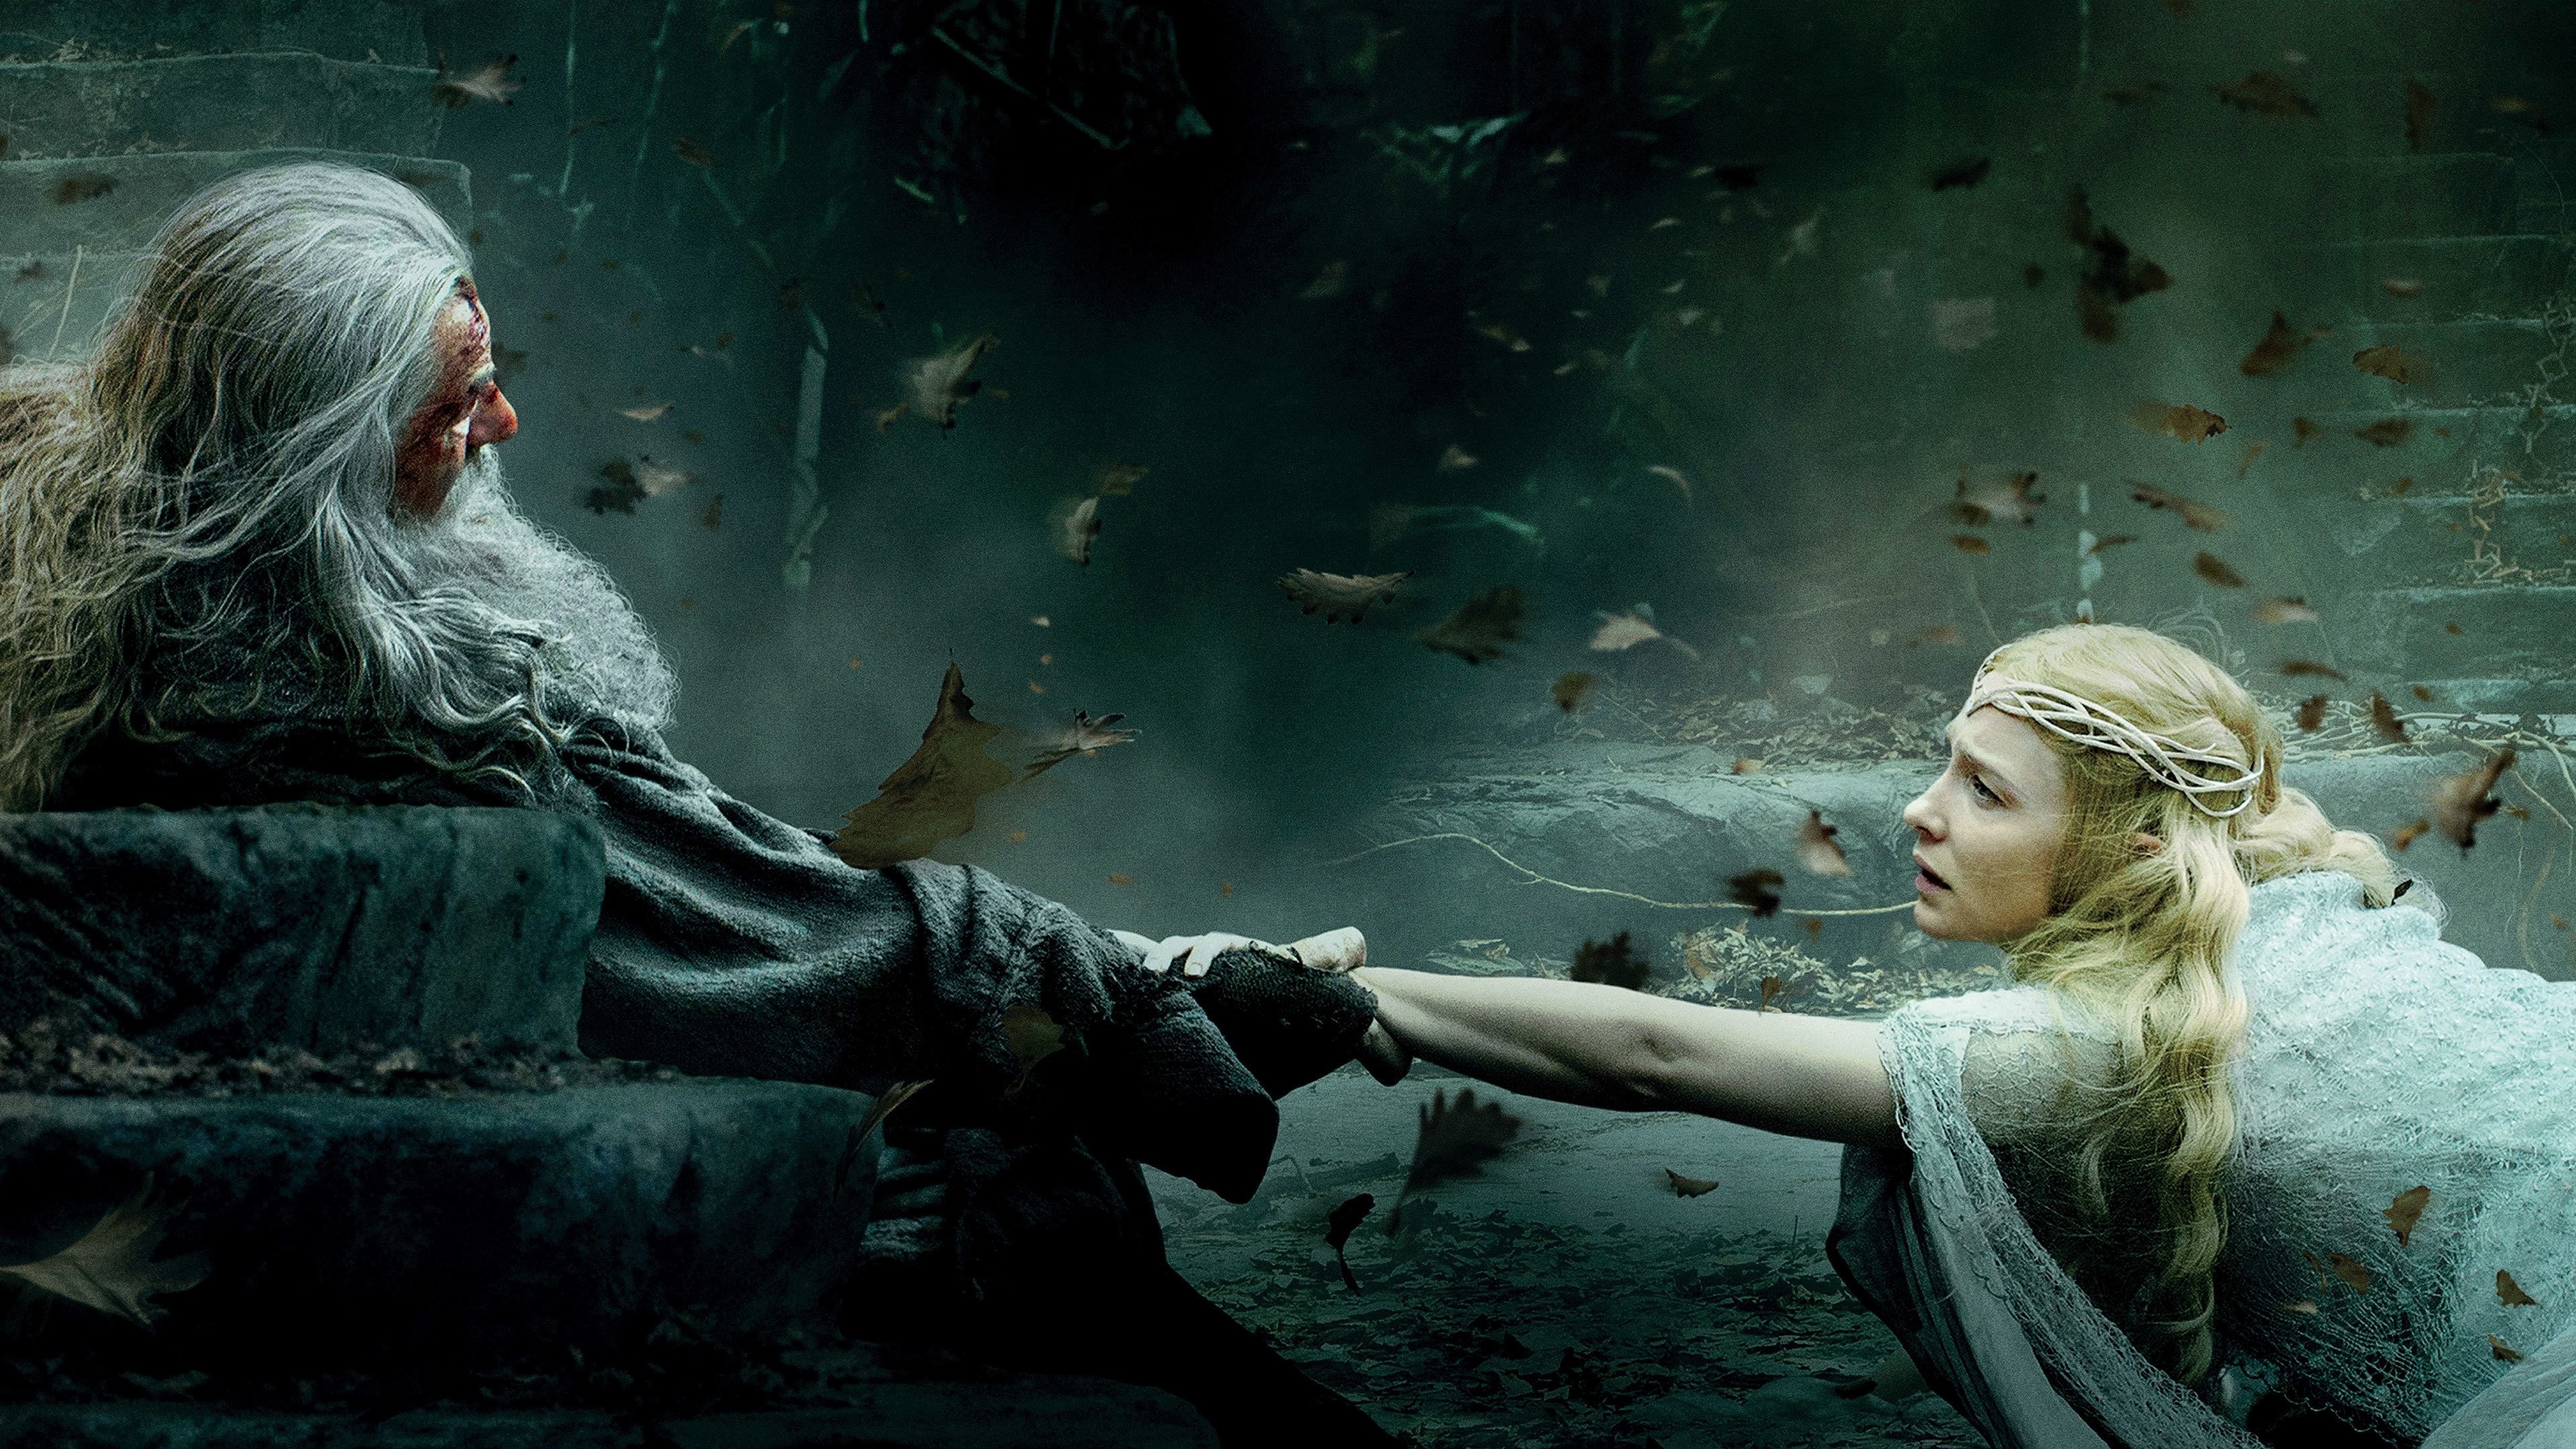 Galadriel: The “Lady” of the woods of Lothlorien, which she ruled with Celeborn, her husband. 3840x2160 4K Wallpaper.